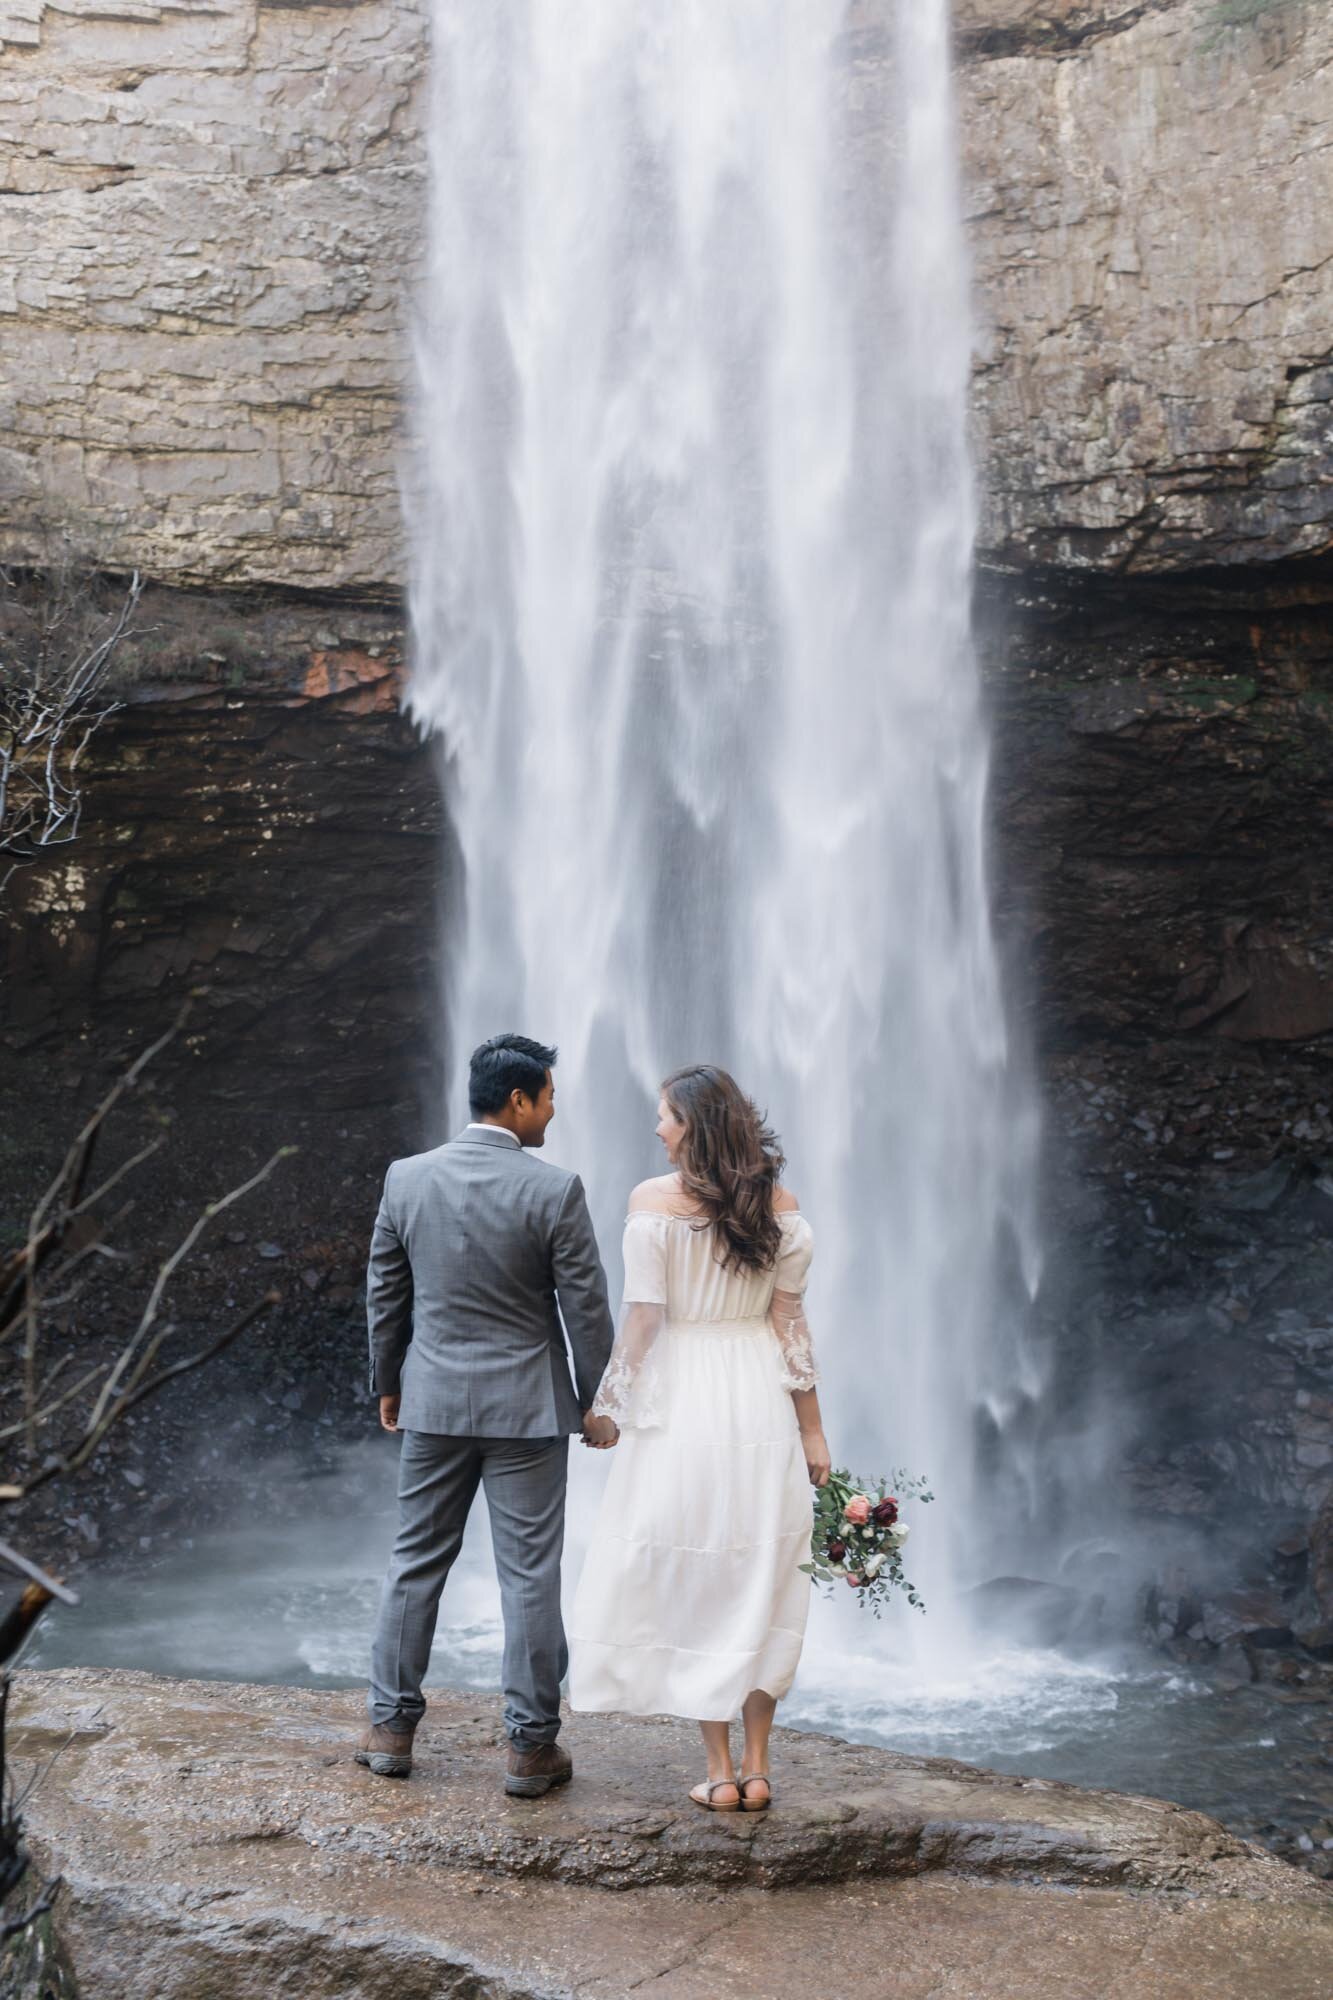 jessica-kovach-photography-finding-the-perfect-waterfall-for-your-elopement-eloping-in-fall-creek-falls-state-park-tn-162.jpg